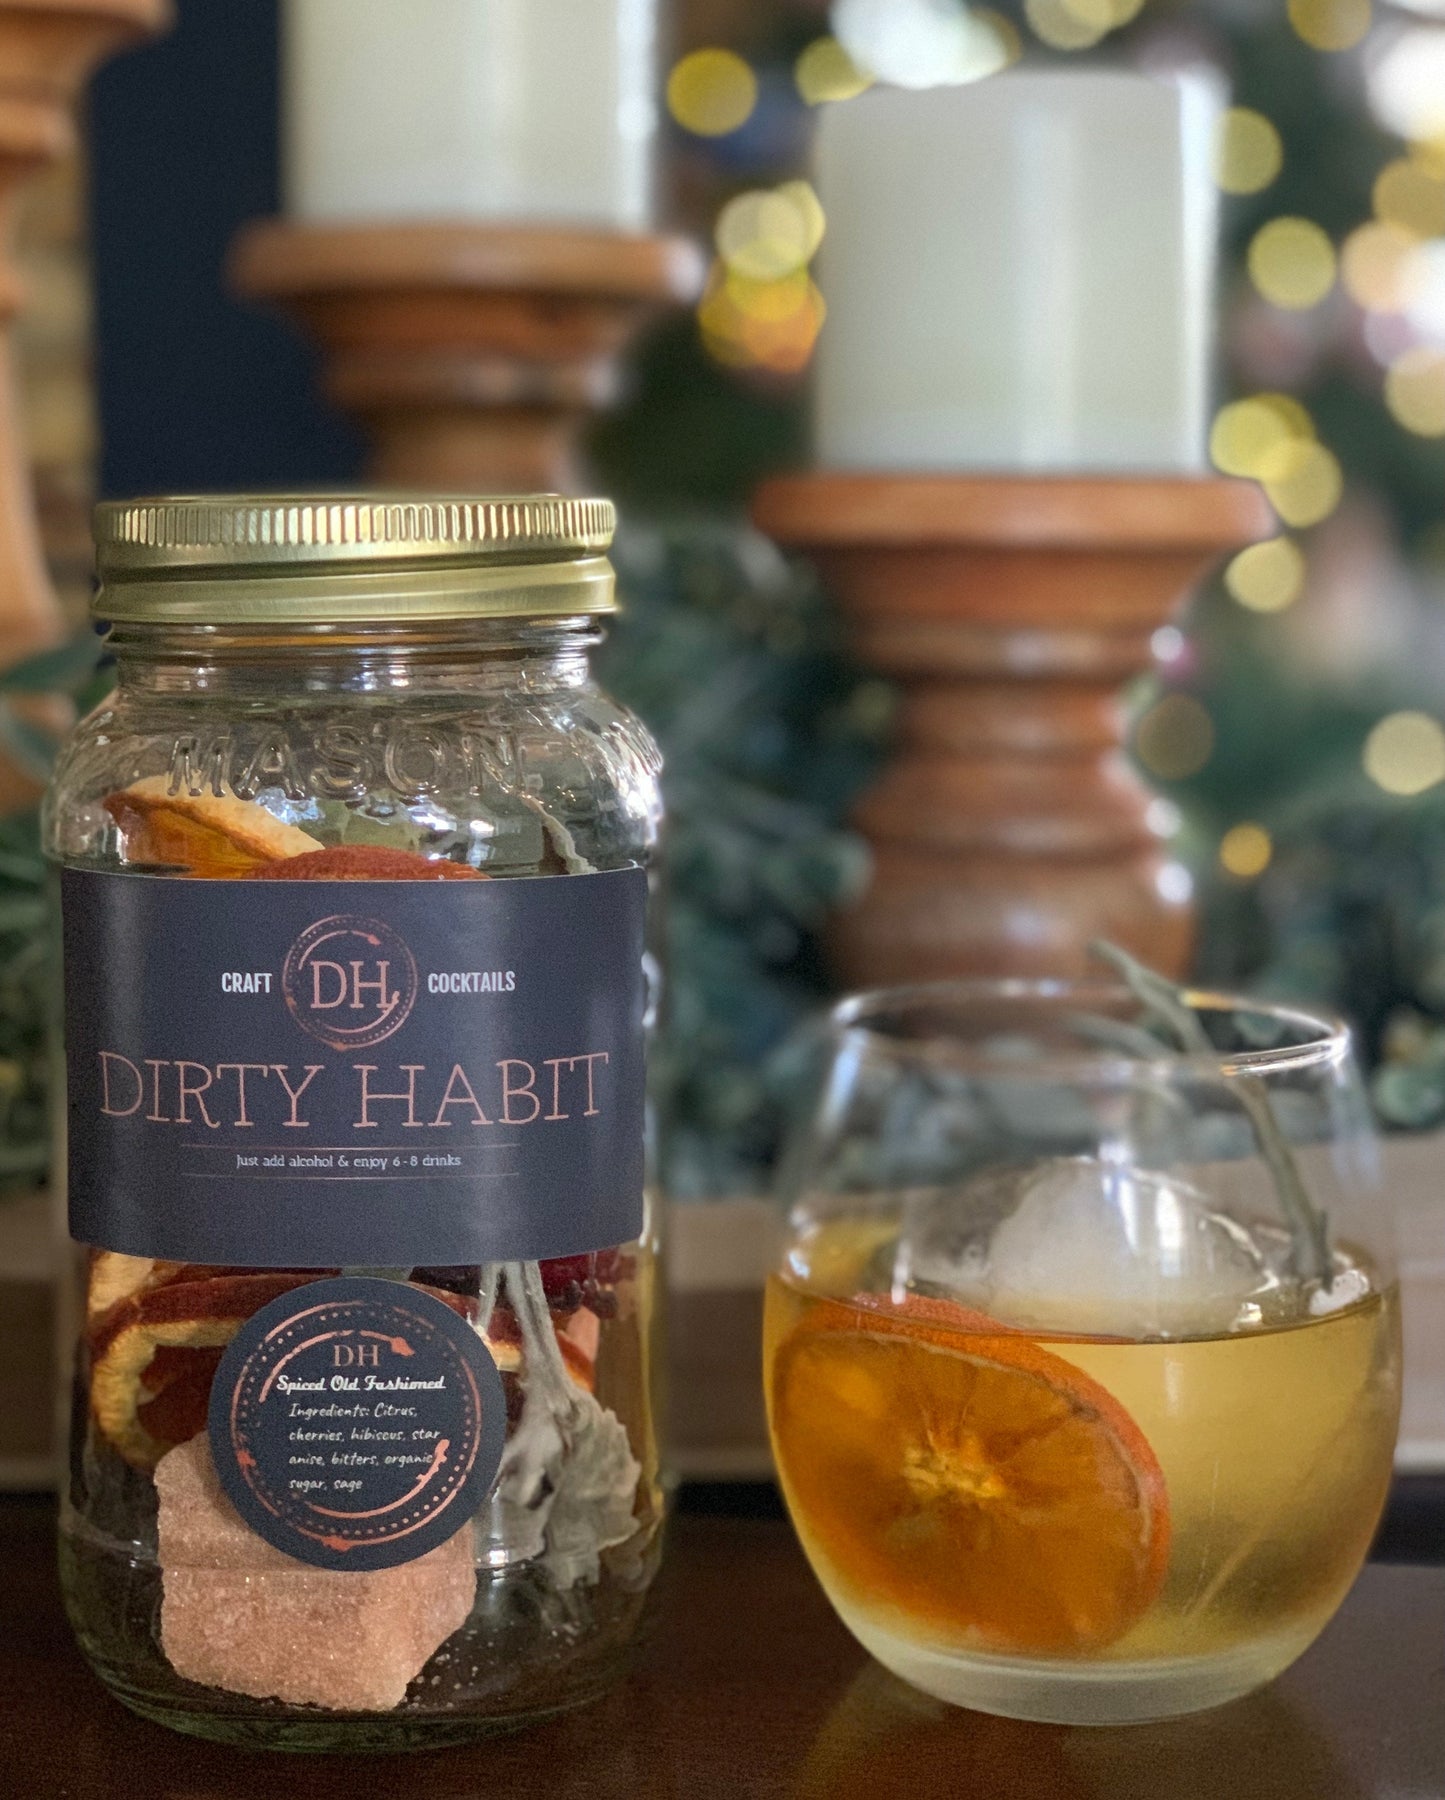 MONTHLY SUBSCRIPTION: Dirty Habit Signature Spiced Old Fashioned Mix